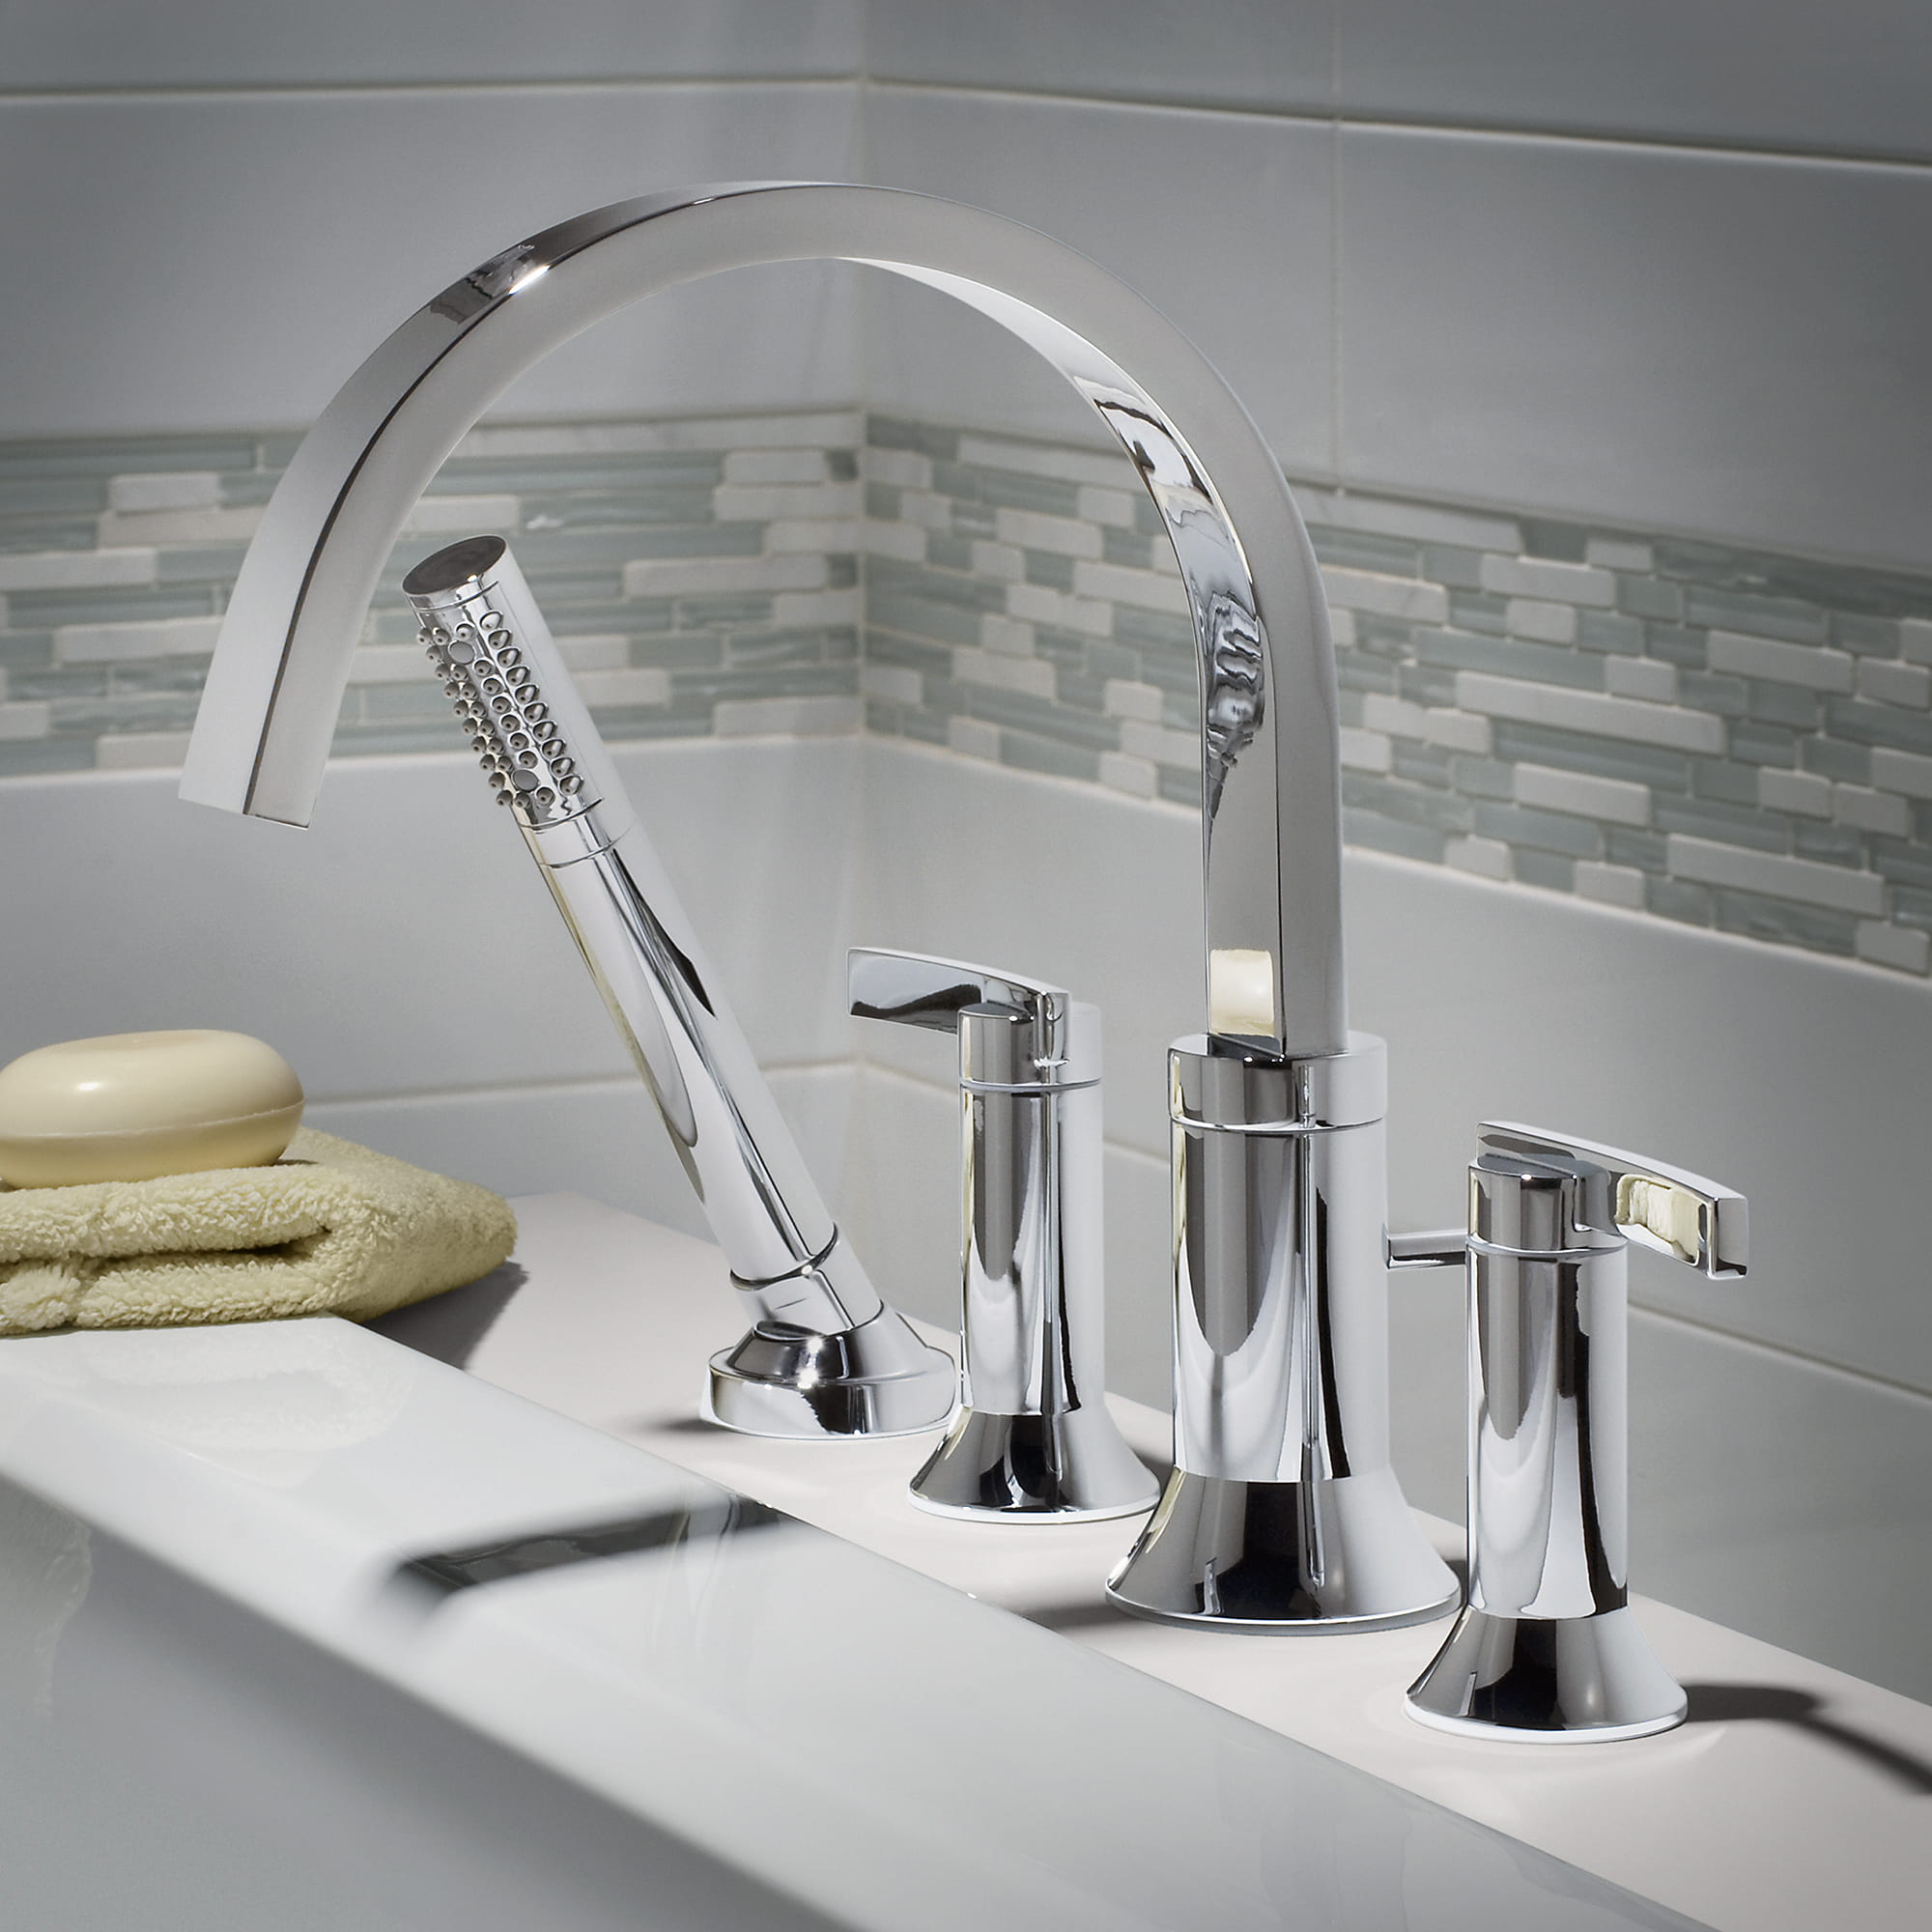 Berwick® Bathtub Faucet With Personal Shower for Flash® Rough-In Valve With Lever Handles